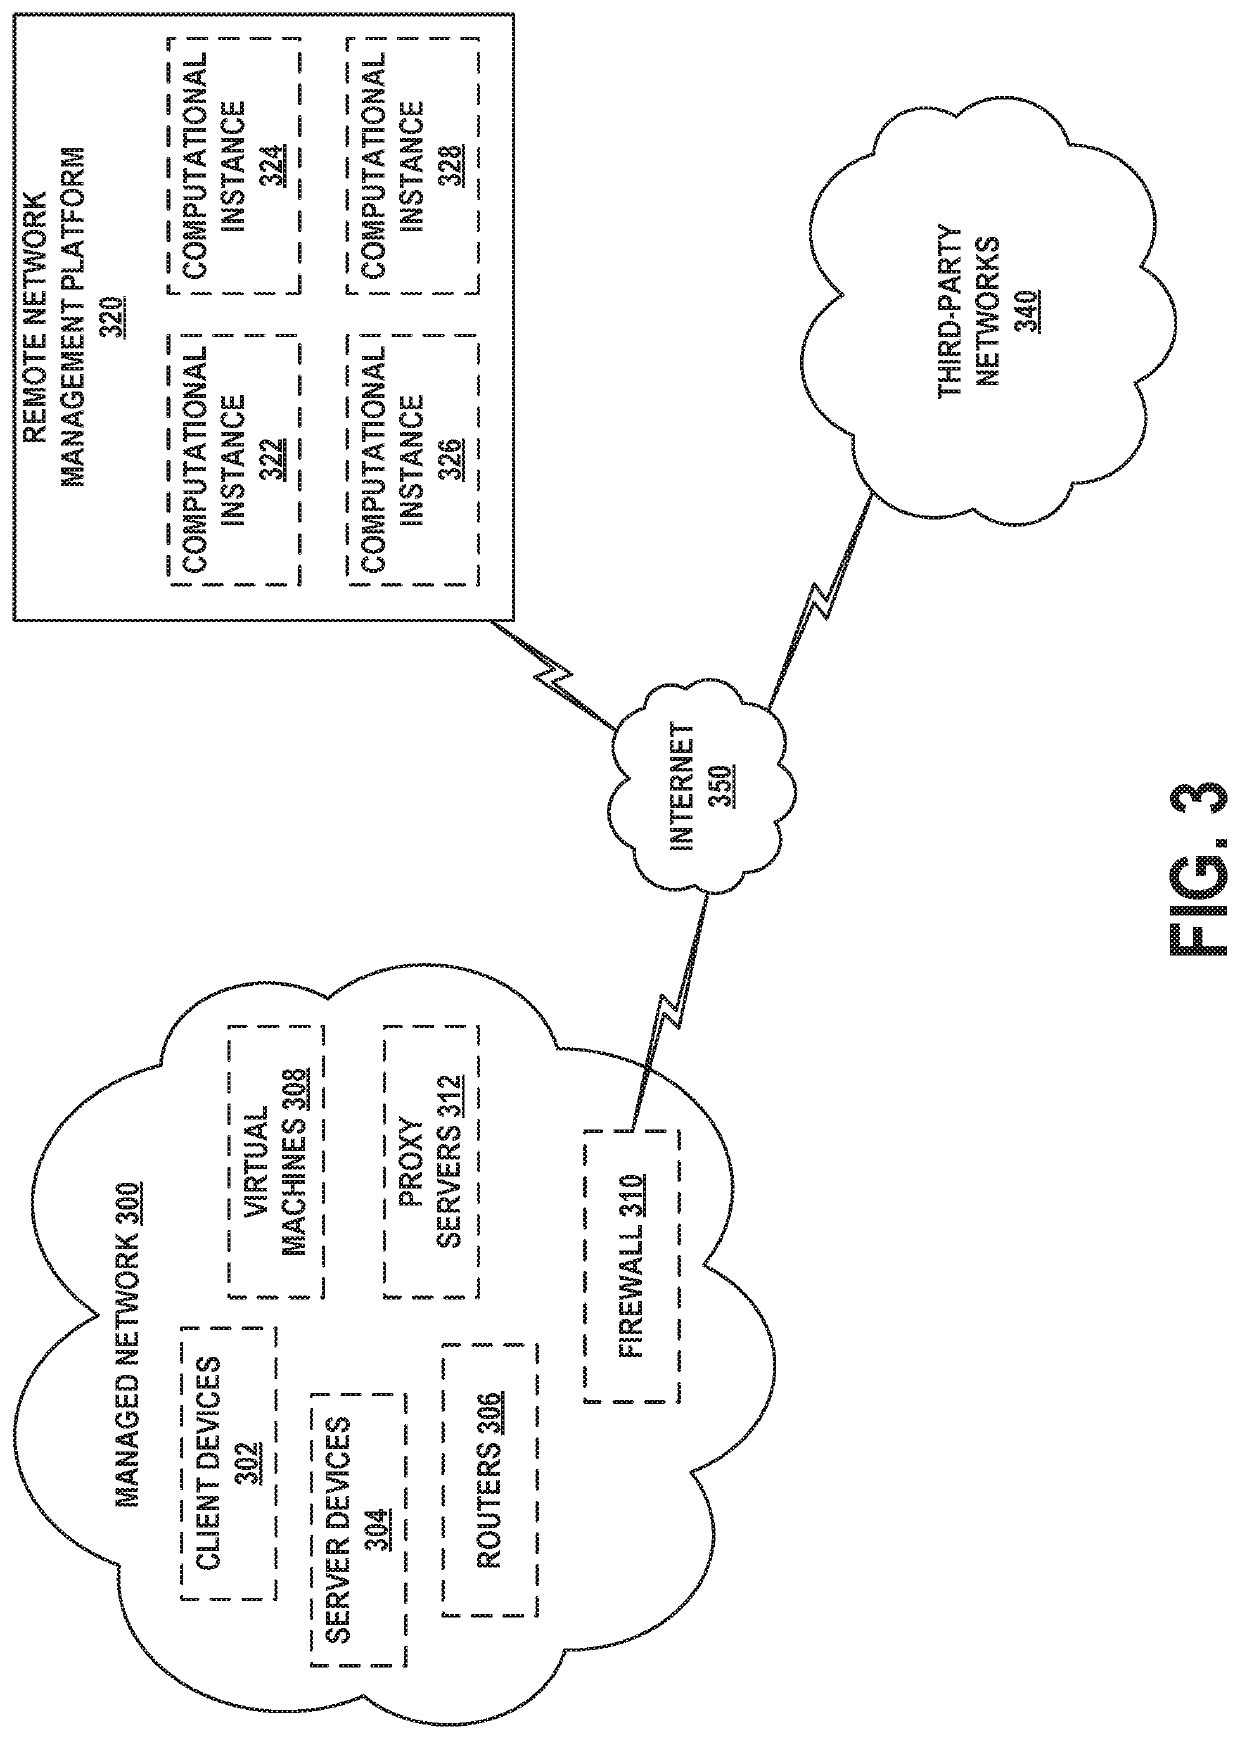 Hybrid anomaly detection for response-time-based events in a managed network